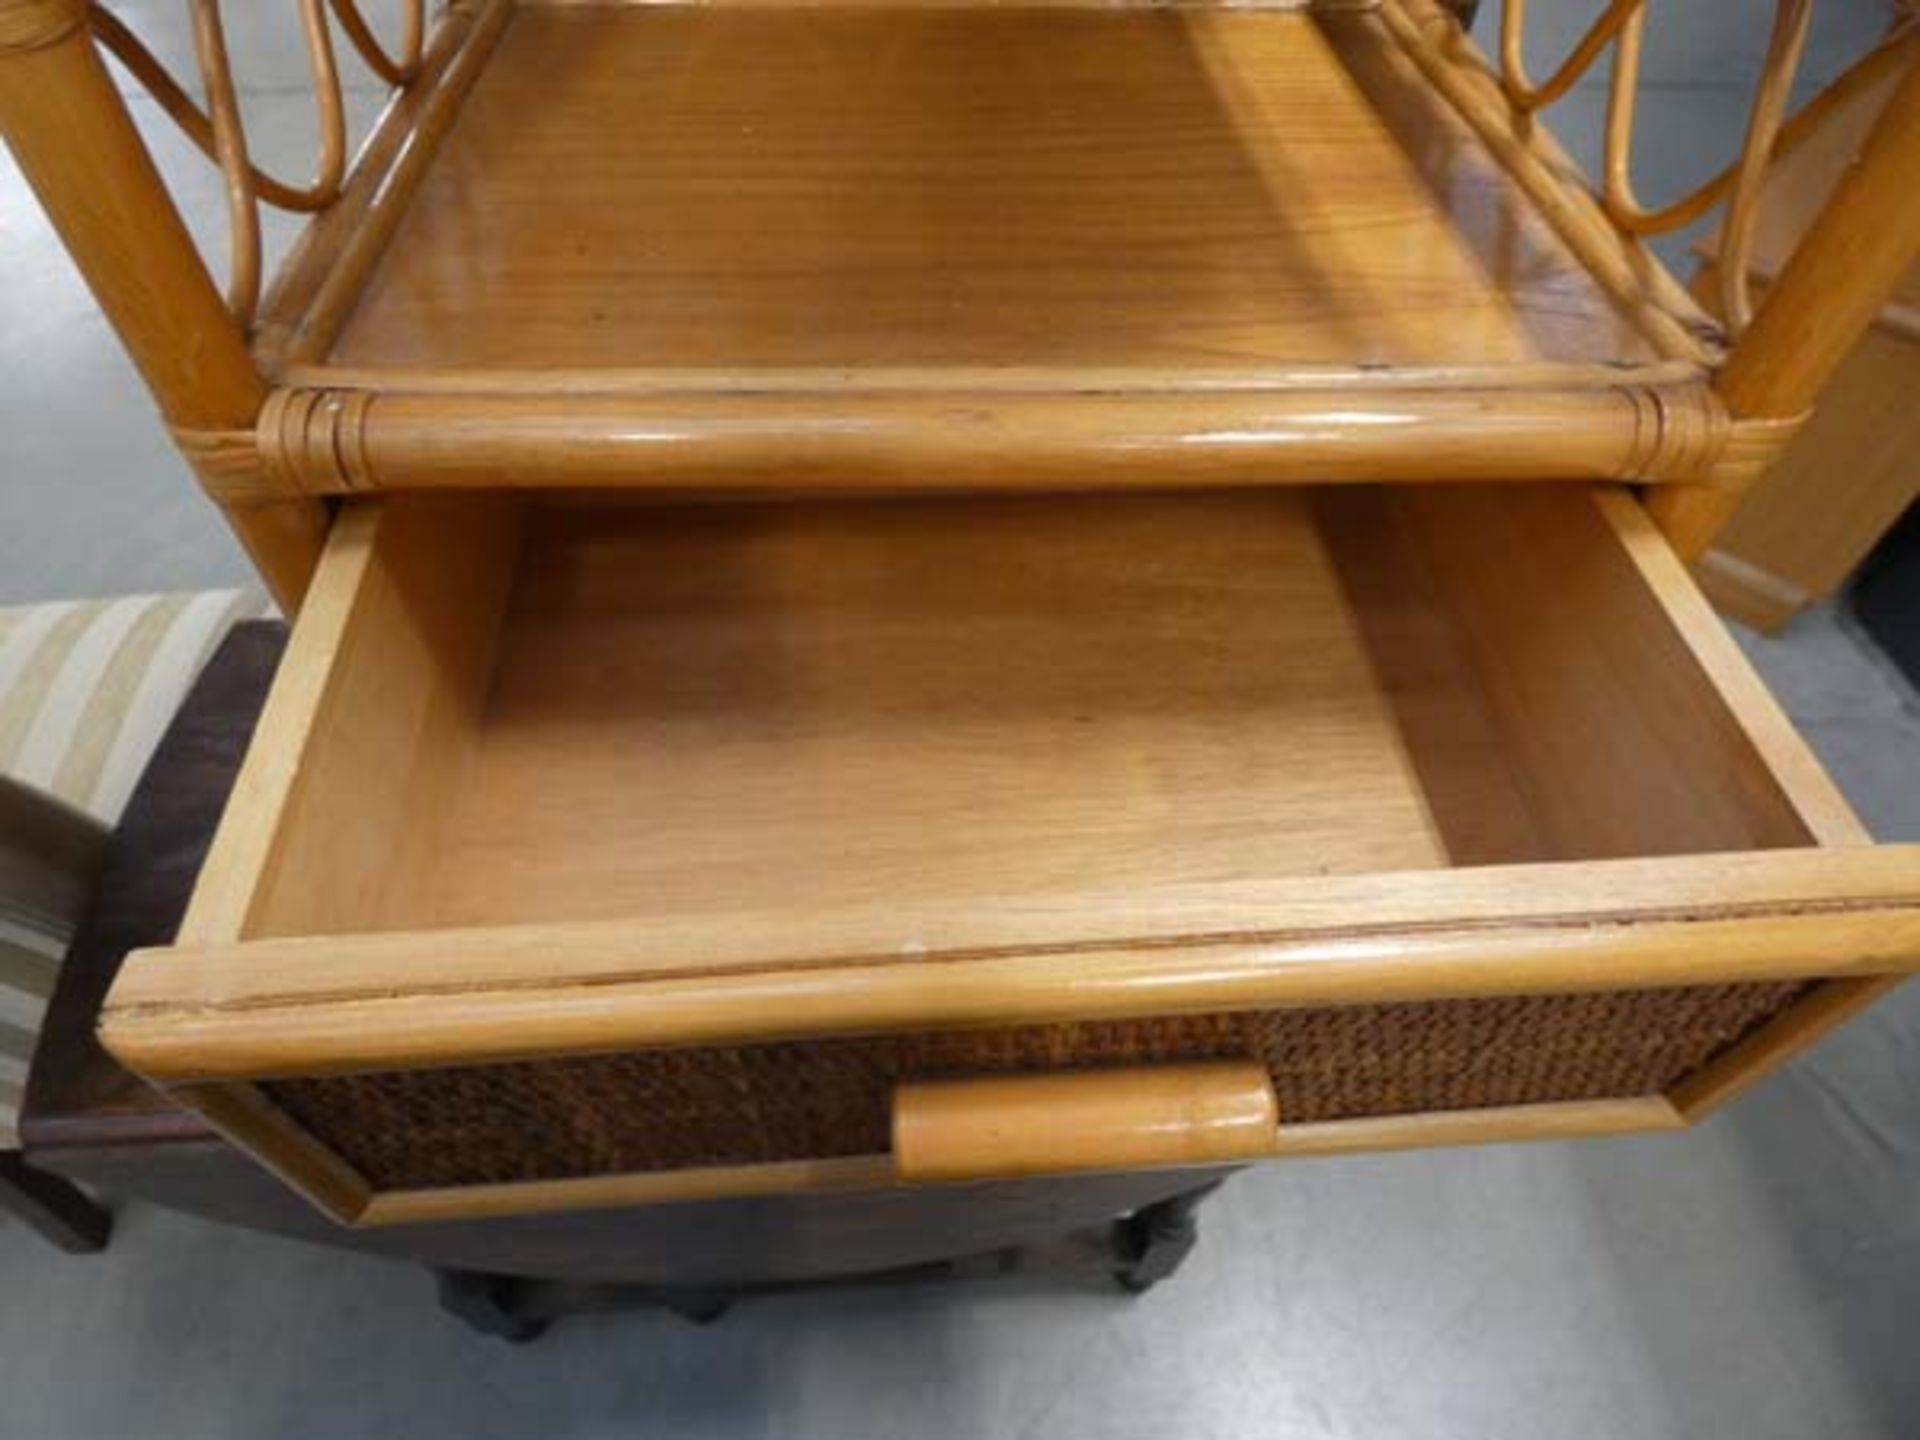 5202 - Bent cane 2 tier stand with drawers under - Image 2 of 2